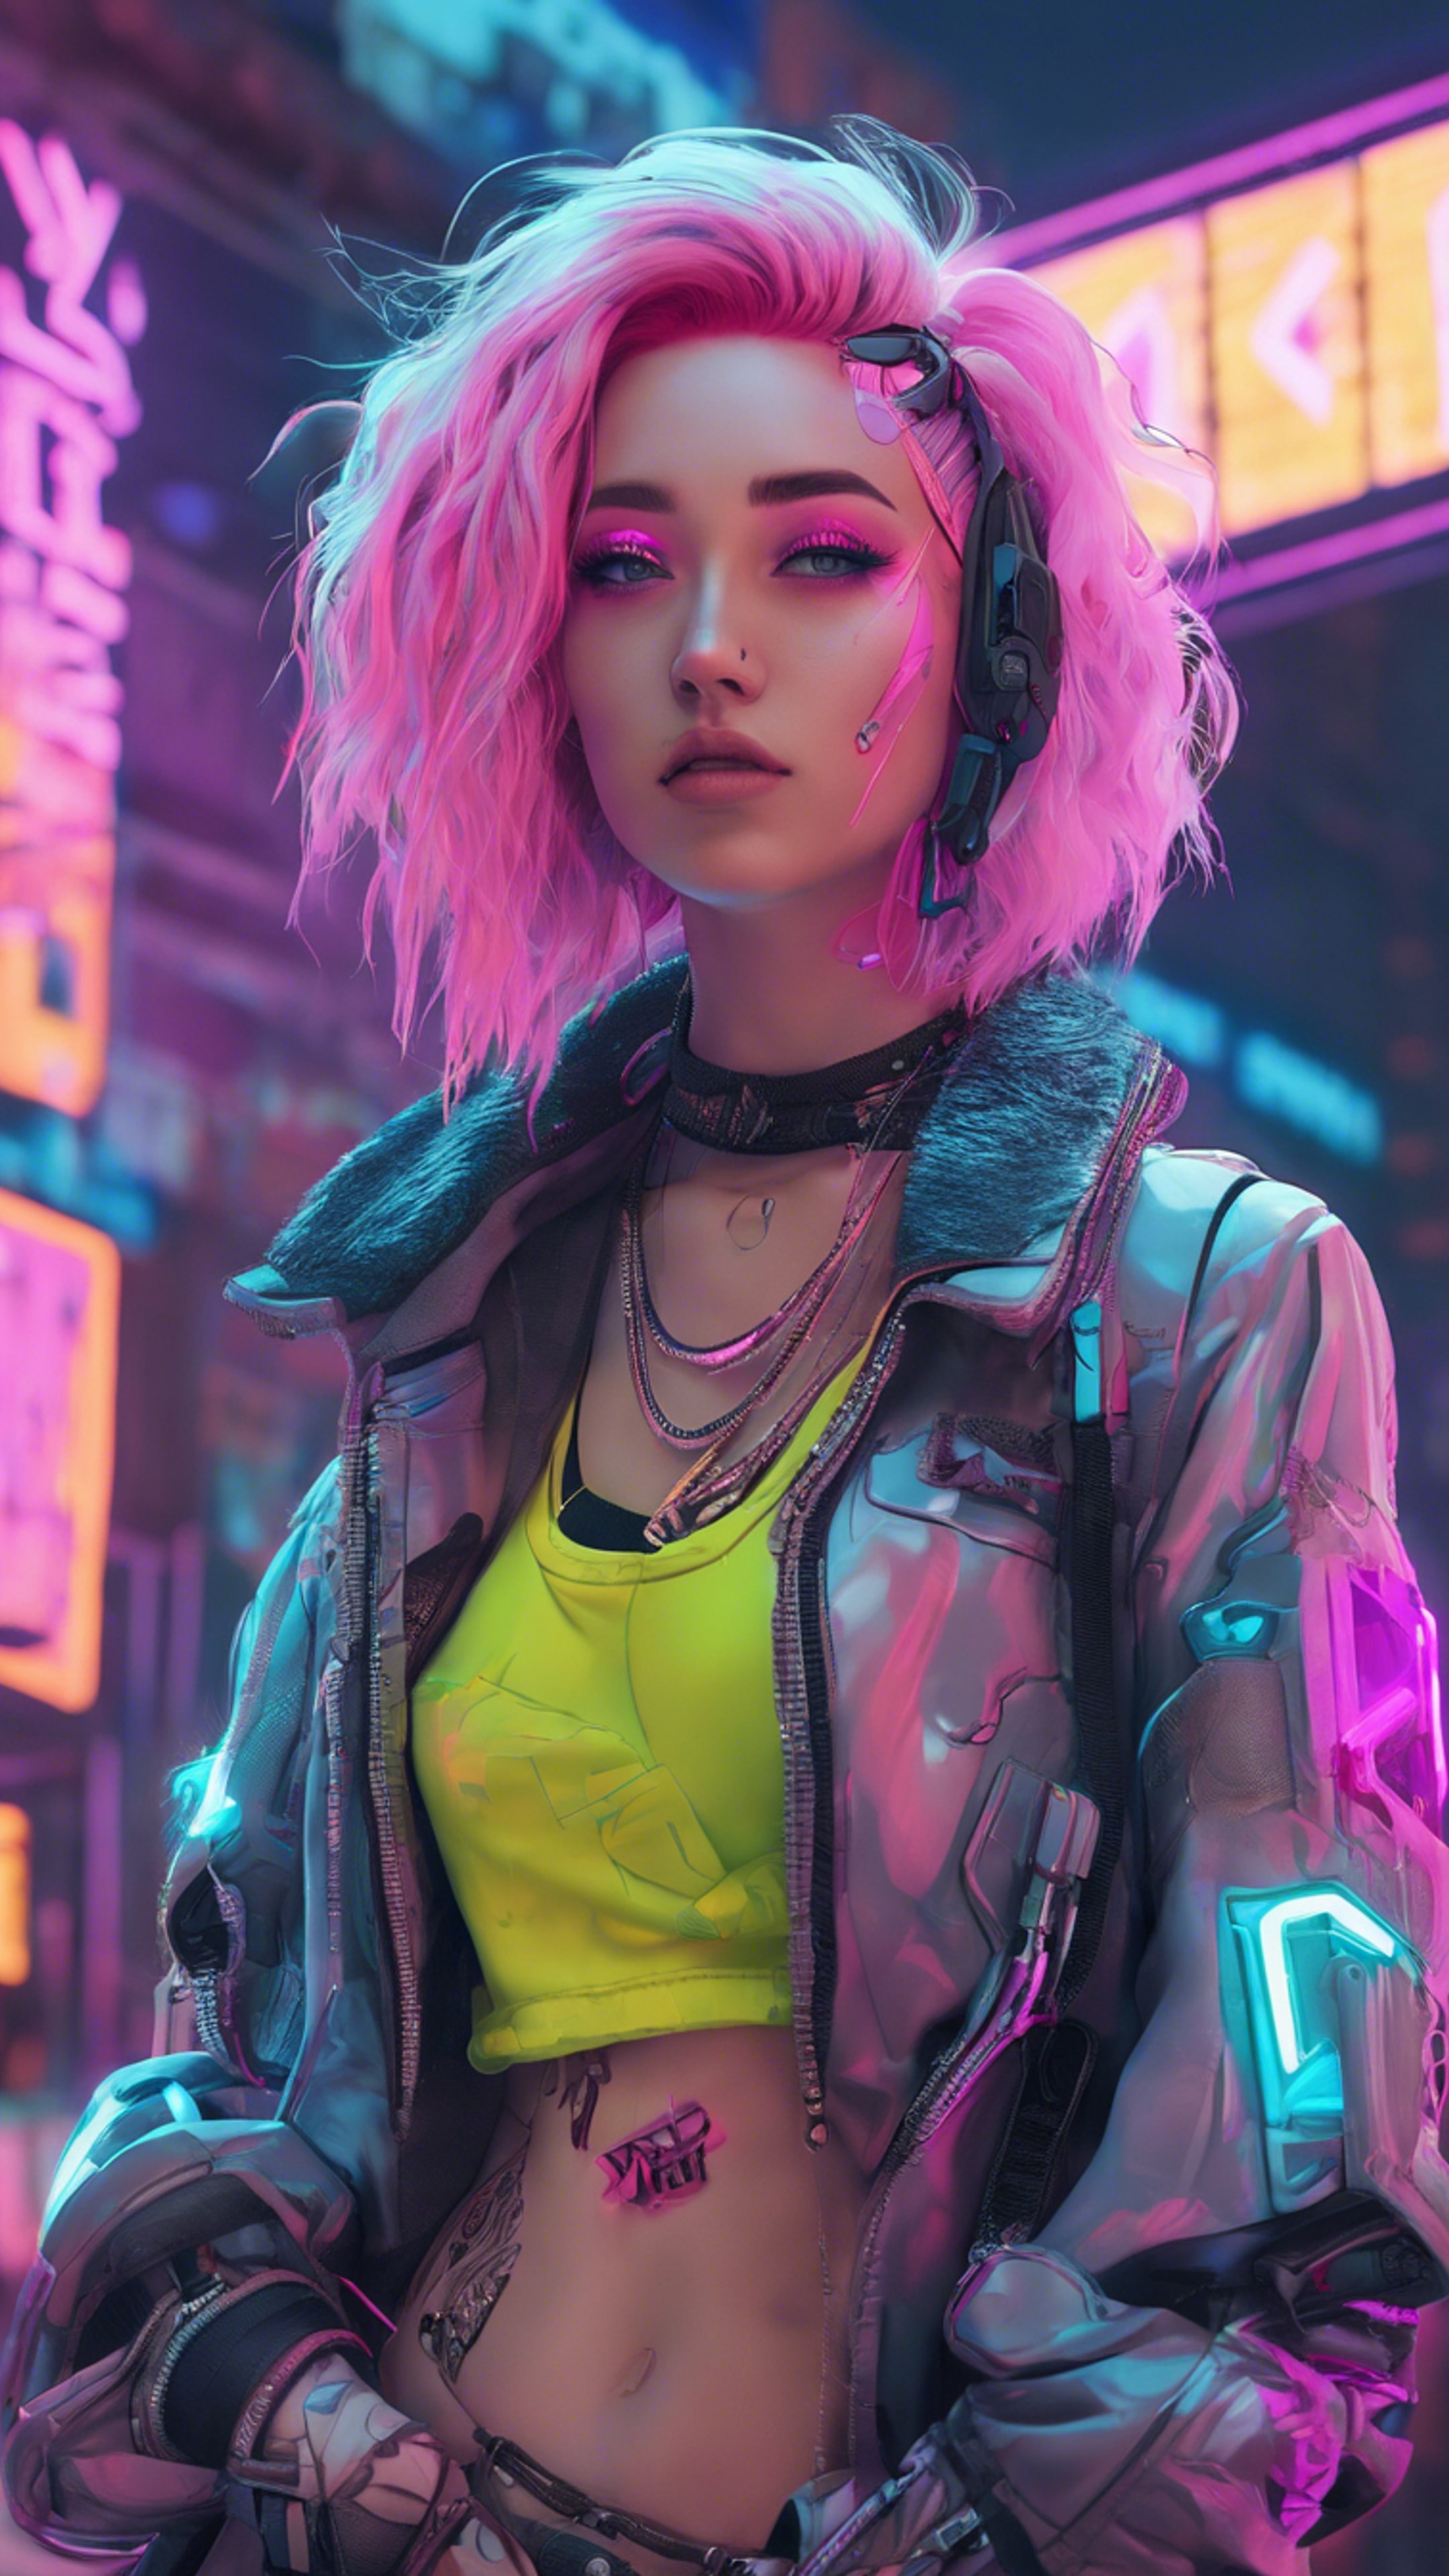 A pastel cyberpunk girl with brightly colored hair, standing in front of a neon sign. Wallpaper[dbbad63d7b584975aa4e]